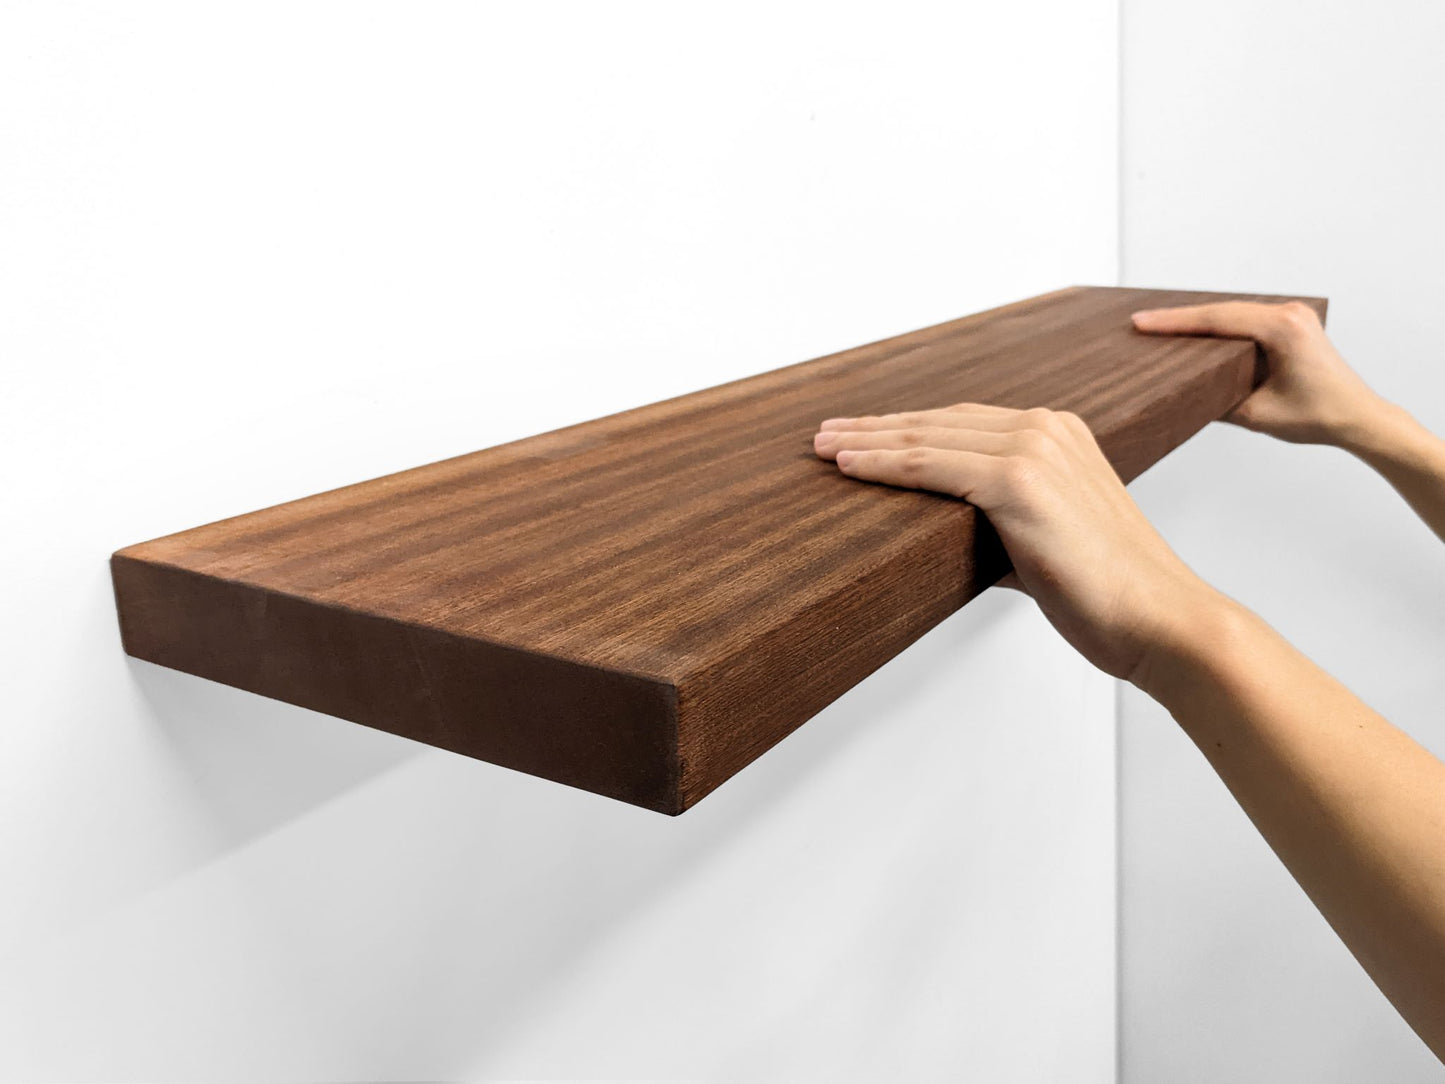 A long floating shelf floats on a wall. The brown mahogany wood displays the natural grain of the heavy duty shelf is highlighted. The shelf casts a shadow on the wall.